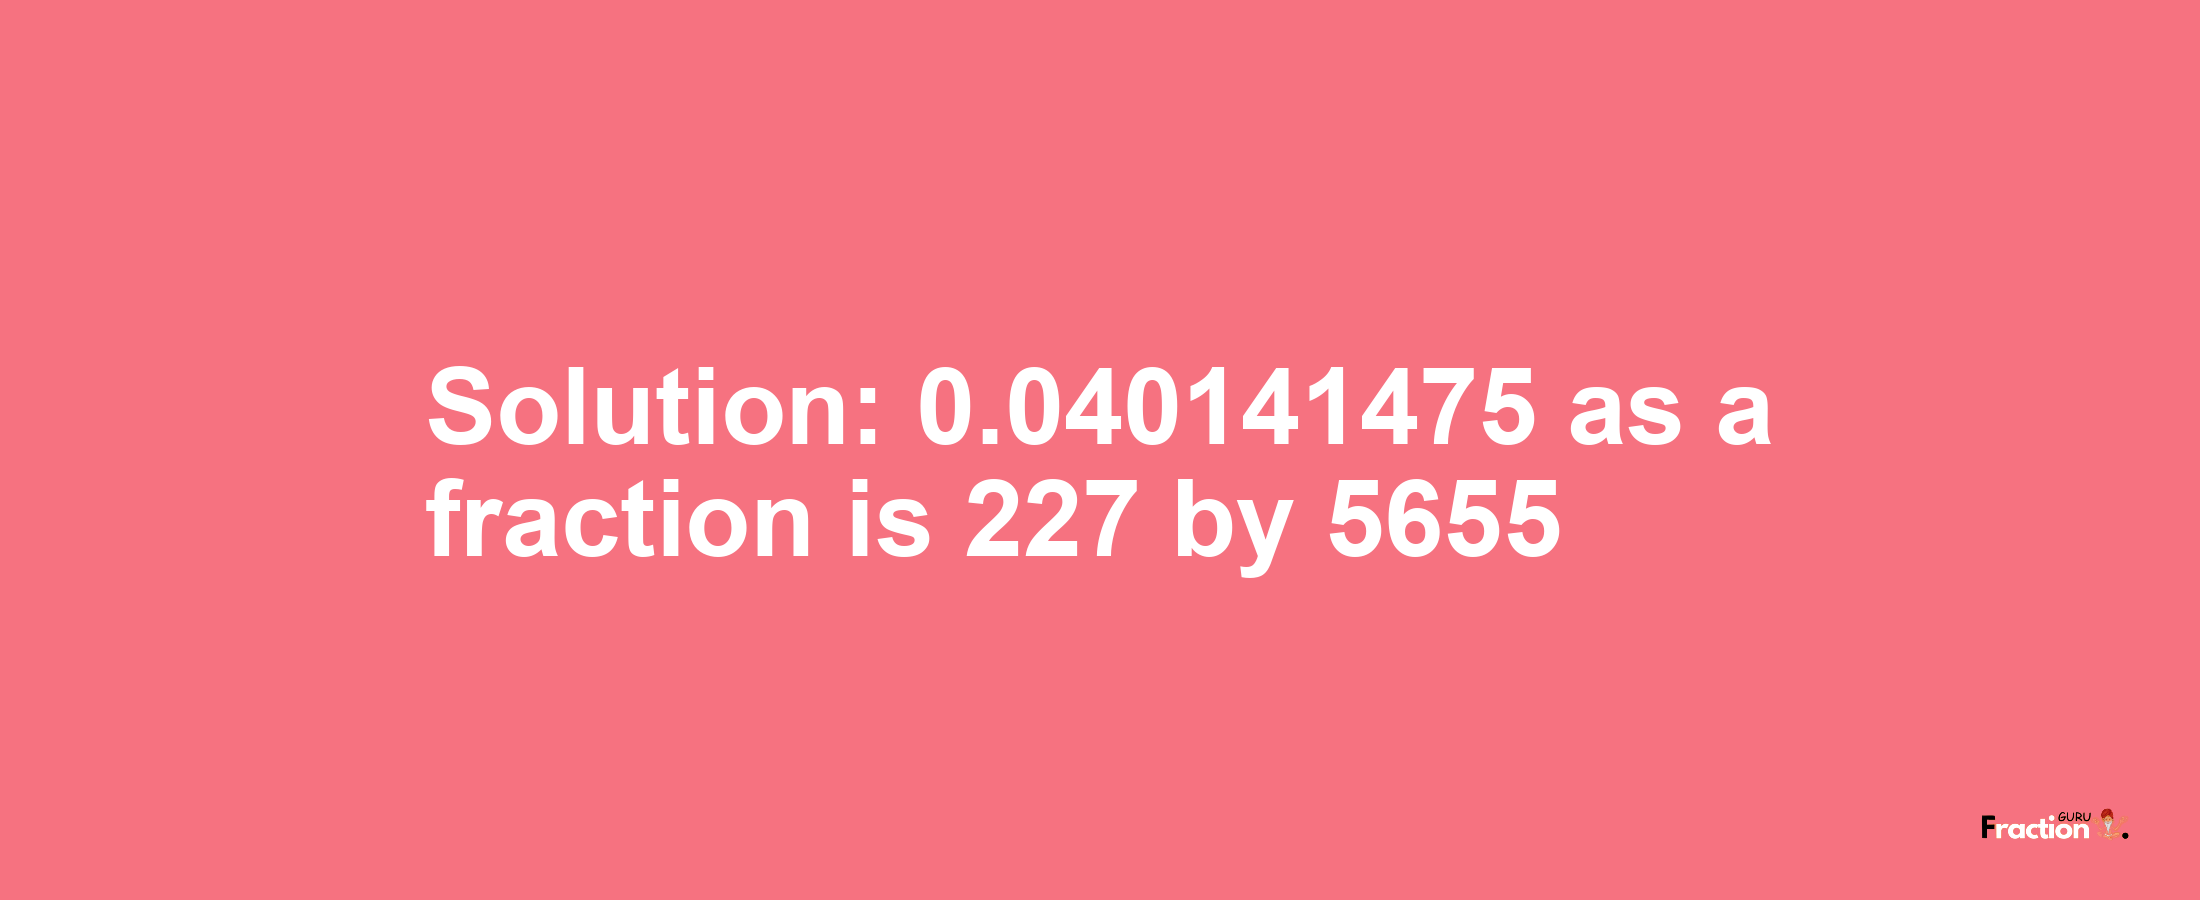 Solution:0.040141475 as a fraction is 227/5655